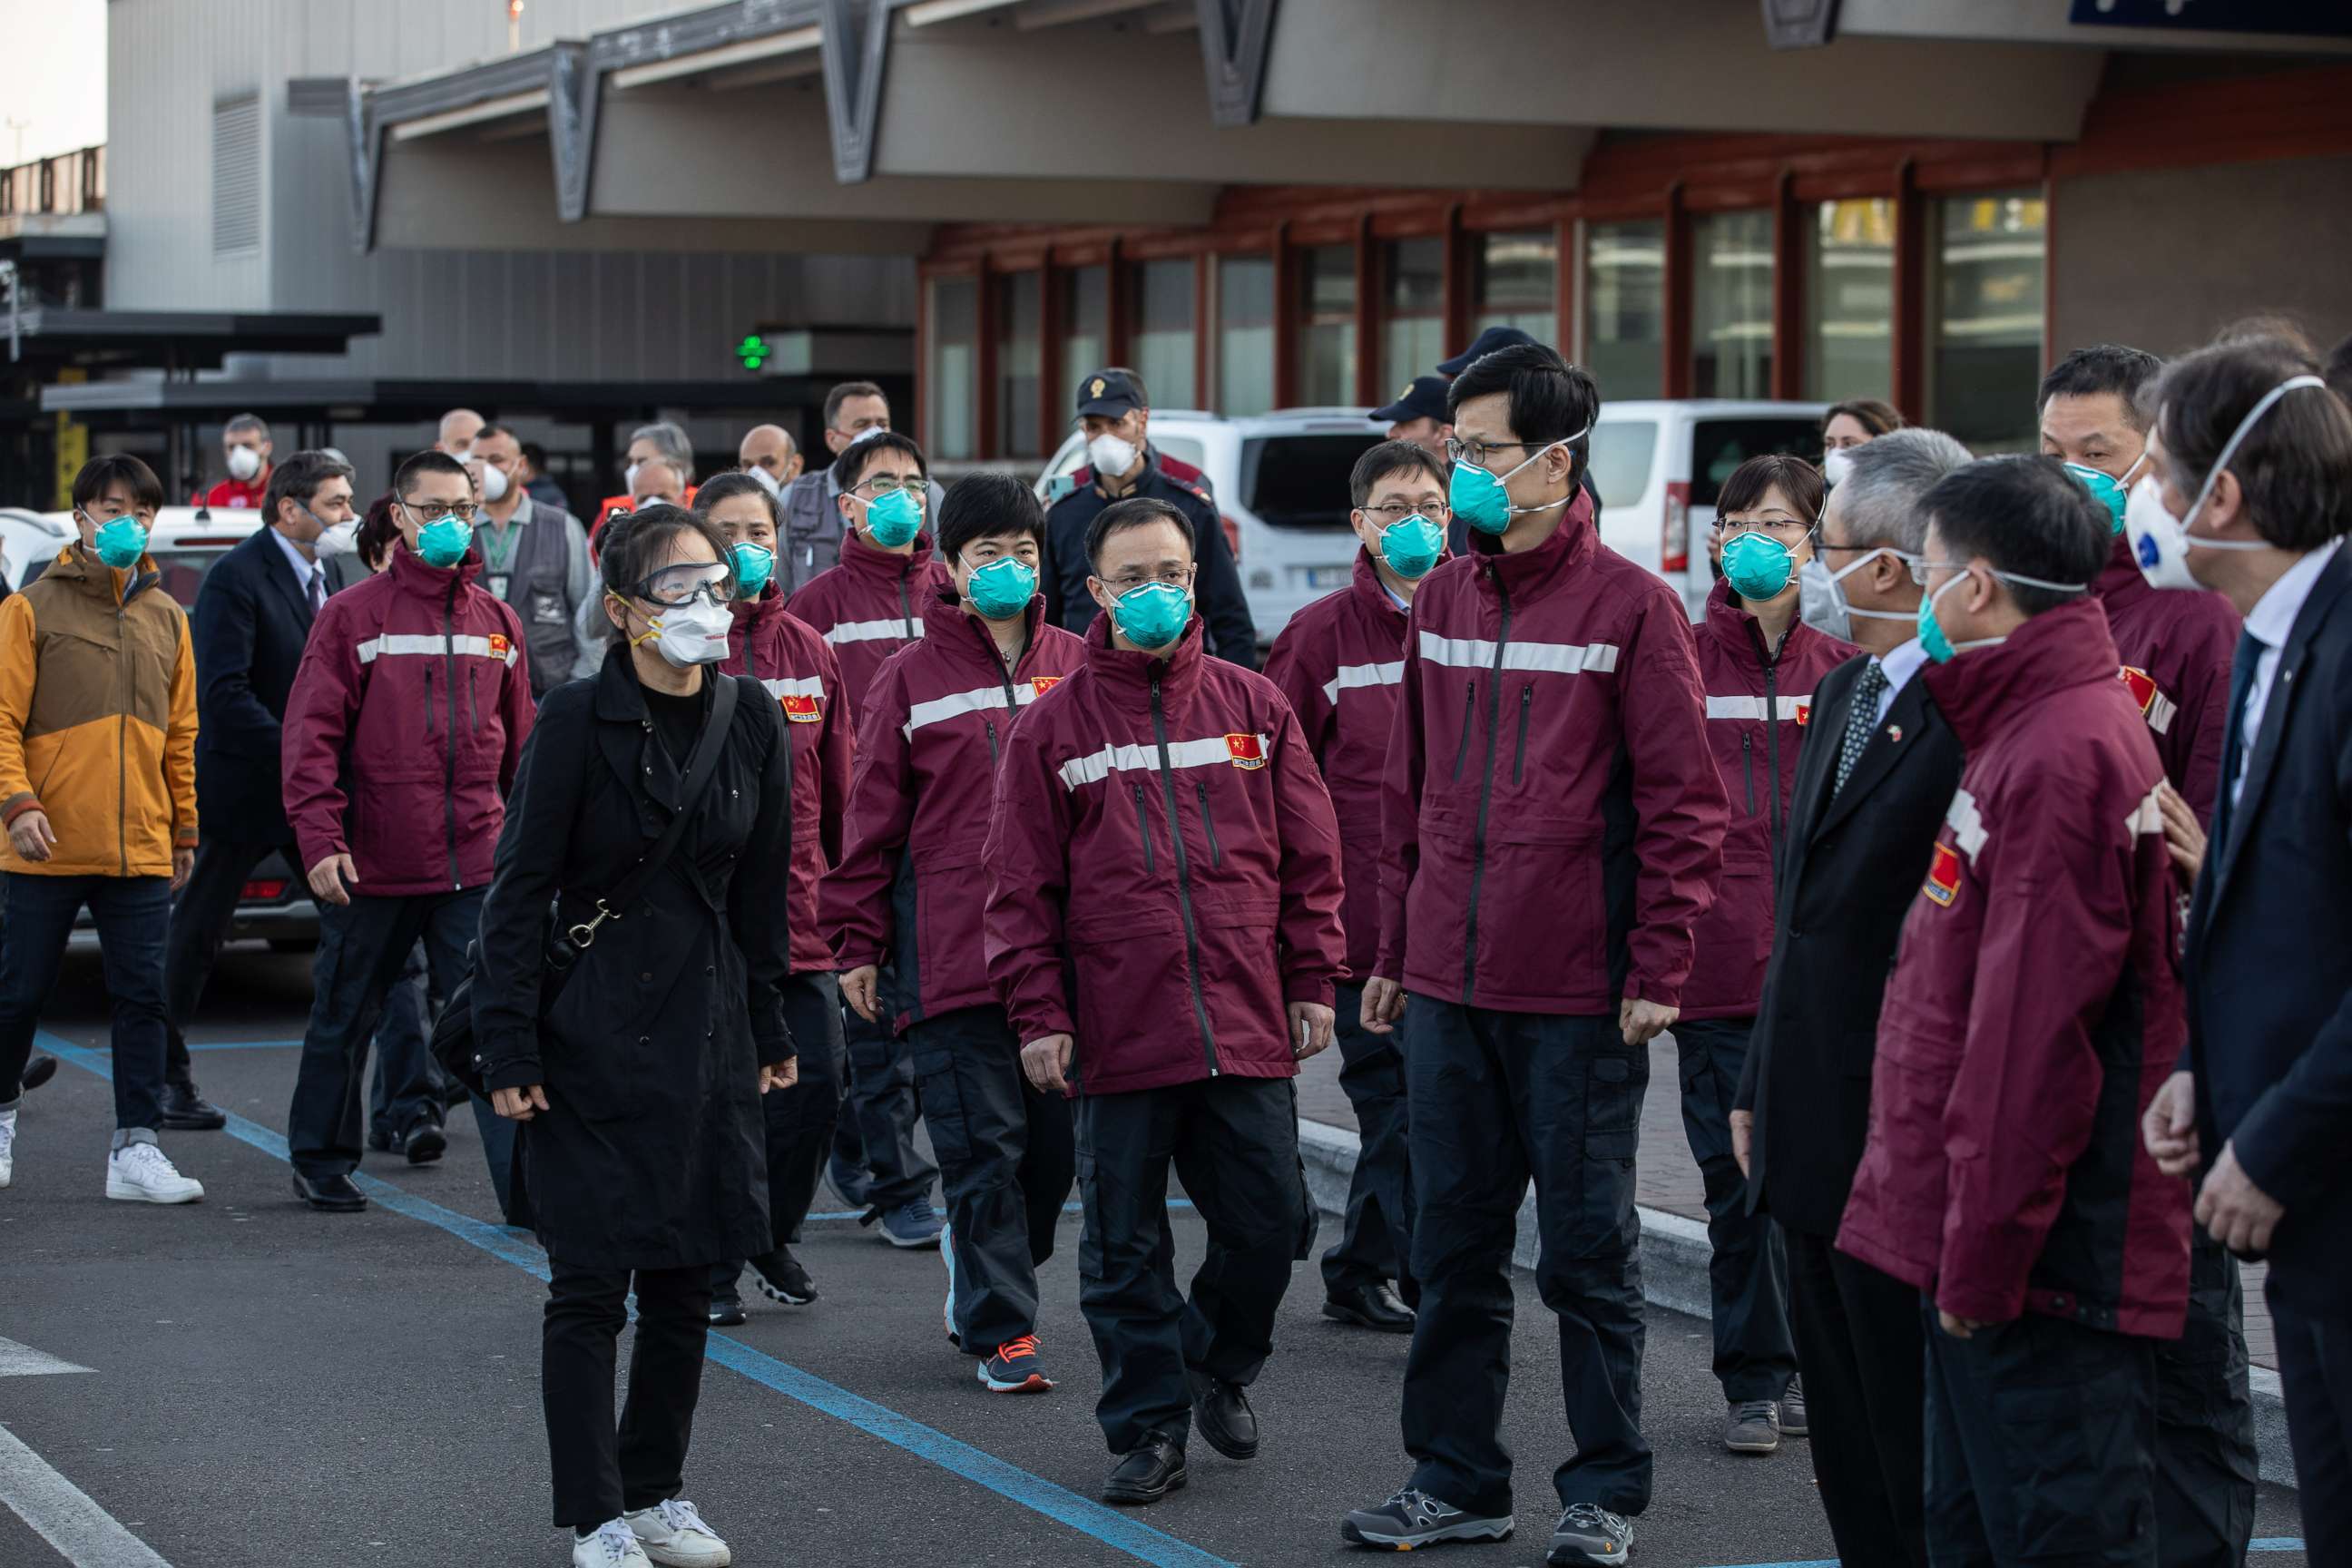 PHOTO: Members of a Chinese medical team gather to attend a press conference after flying to the airport in Ferno, Italy, March 18, 2020.